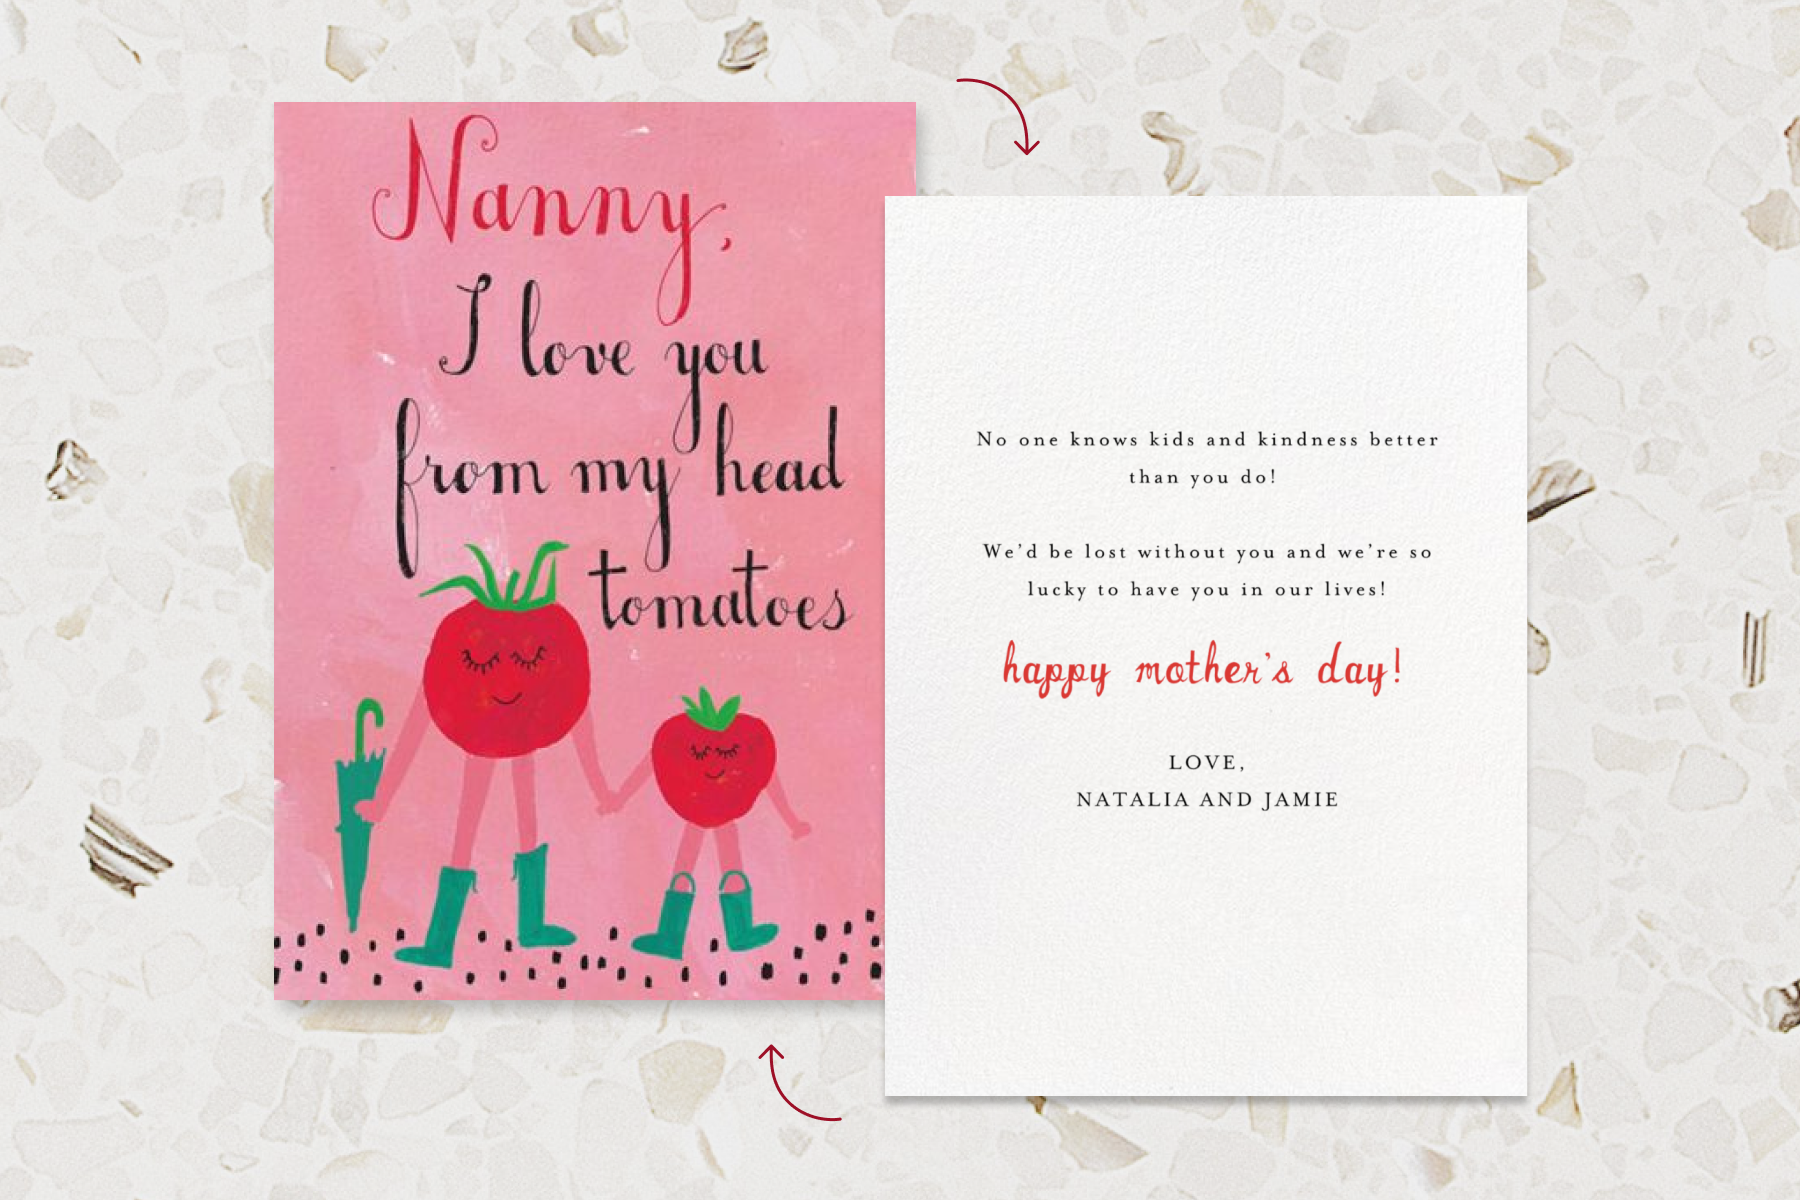 Mother's Day Messages: What to Write in a Mother's Day Card